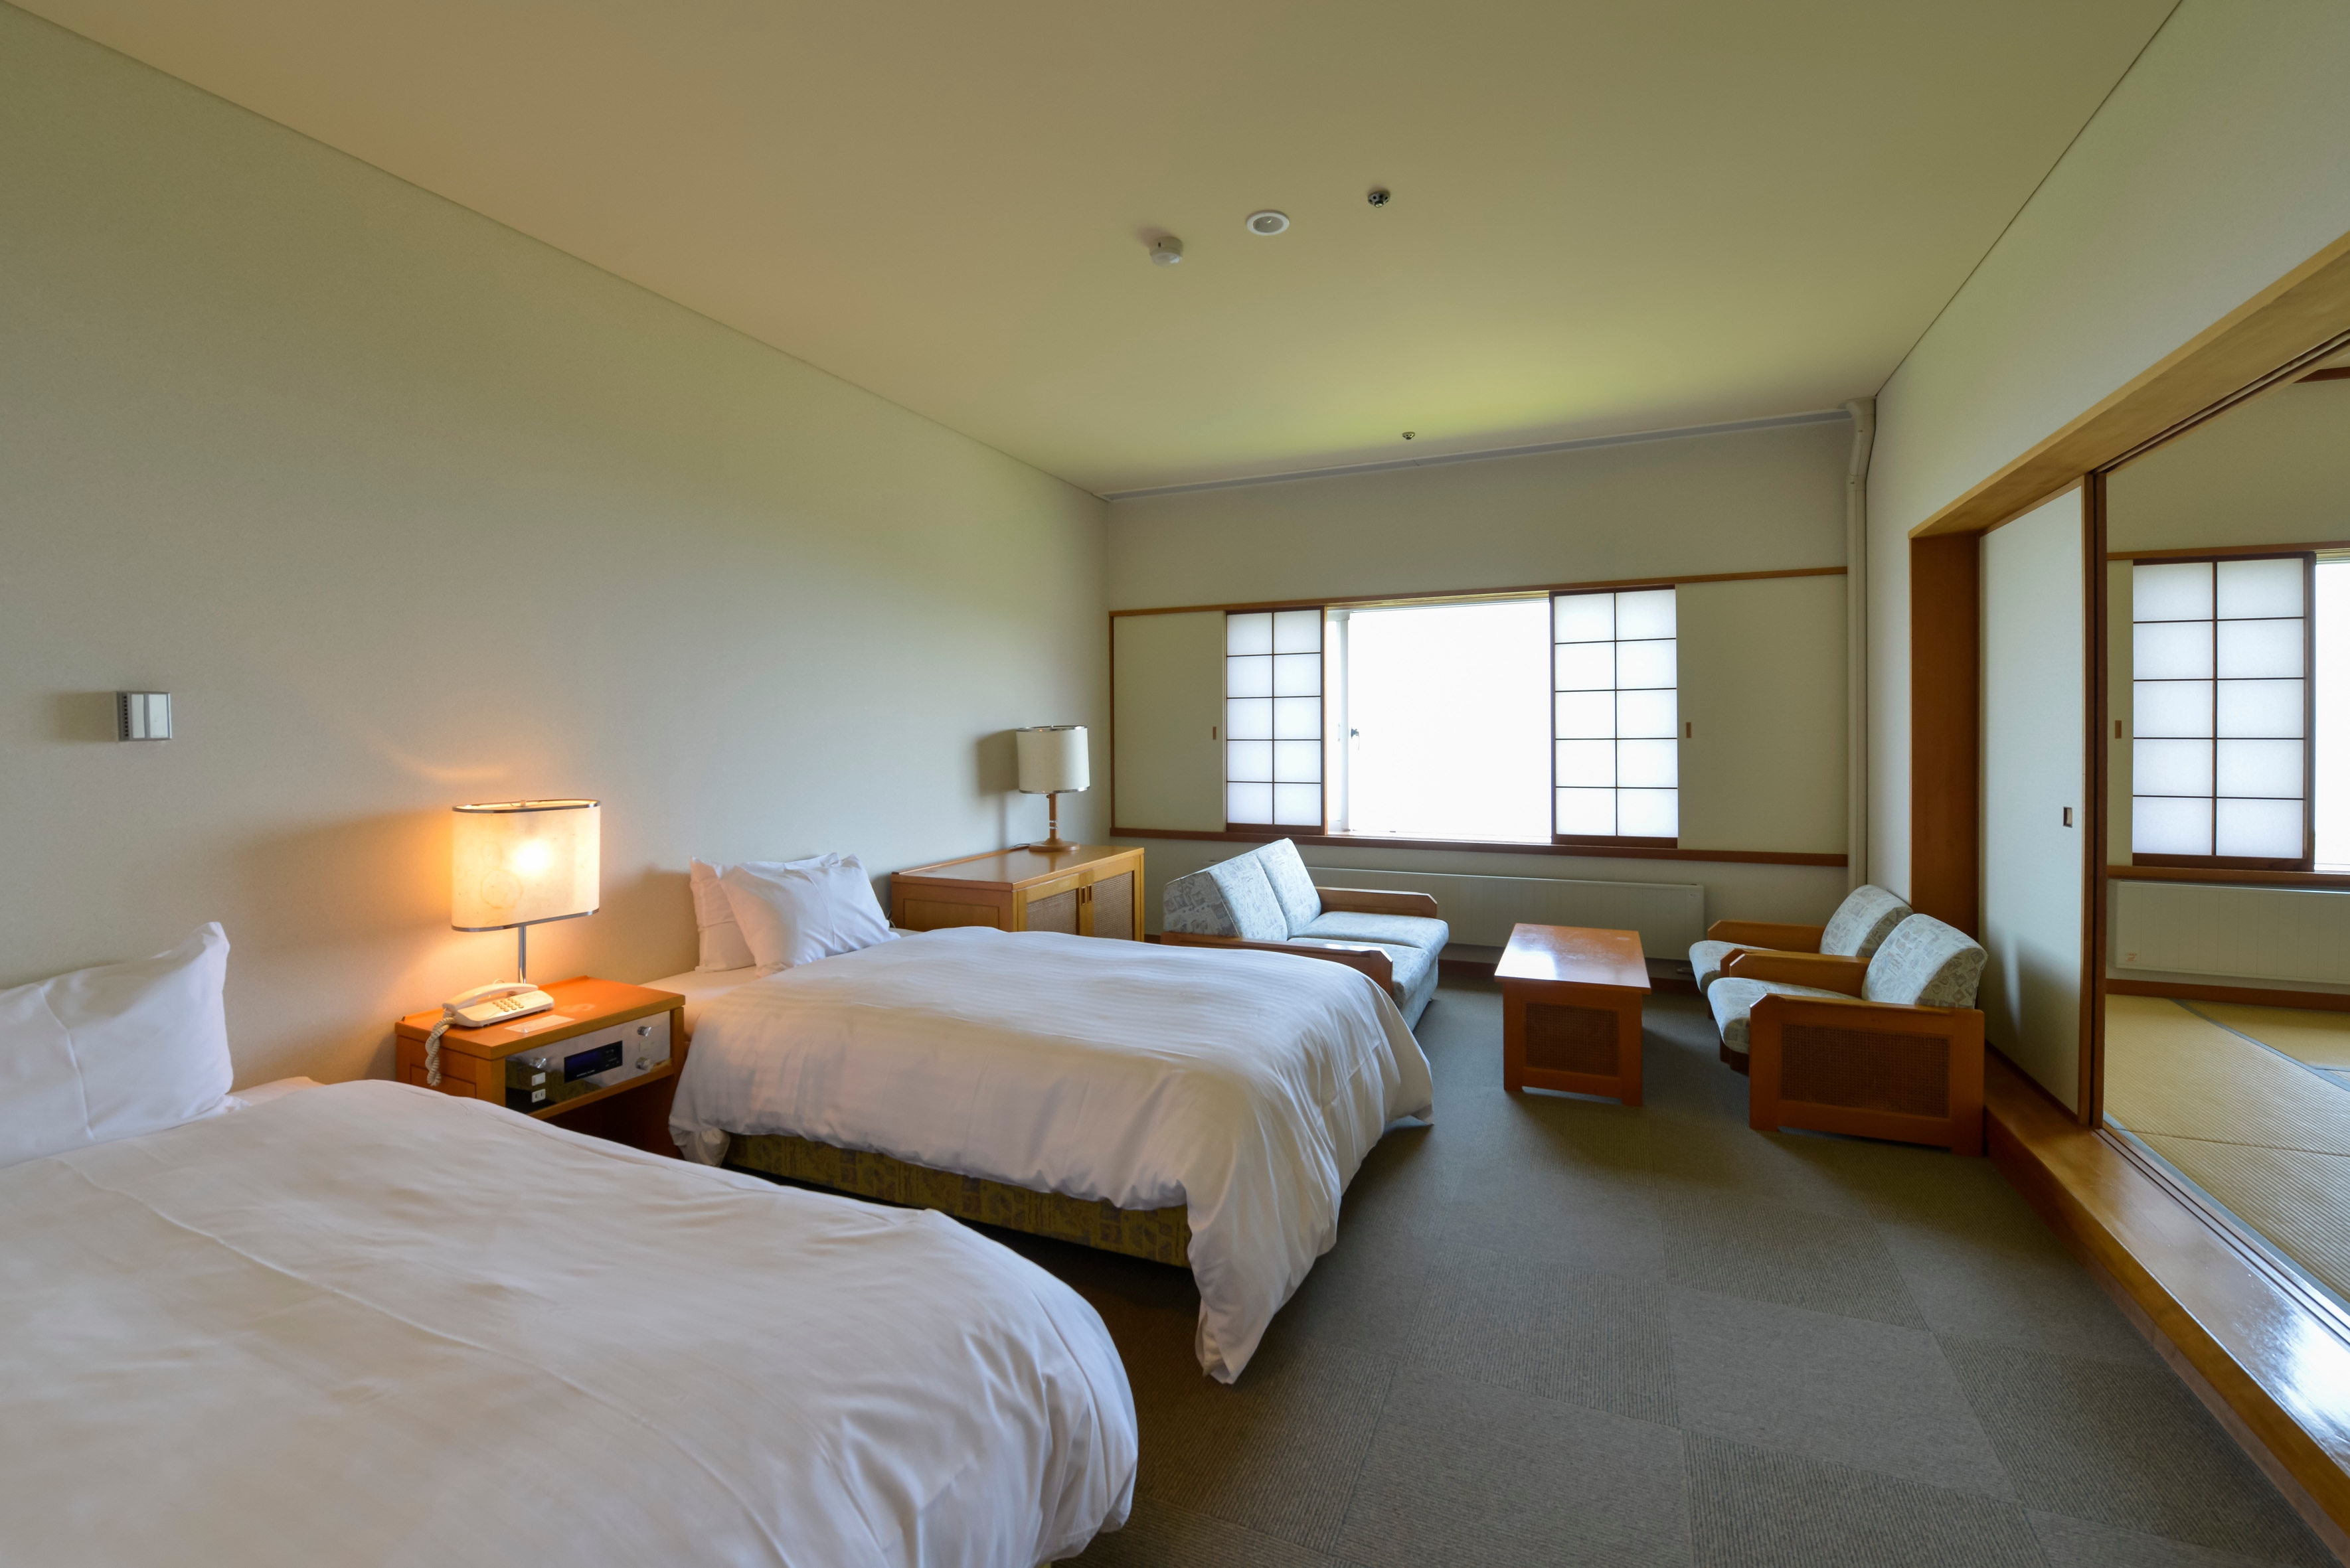 Semi-suite (Japanese and Western room)